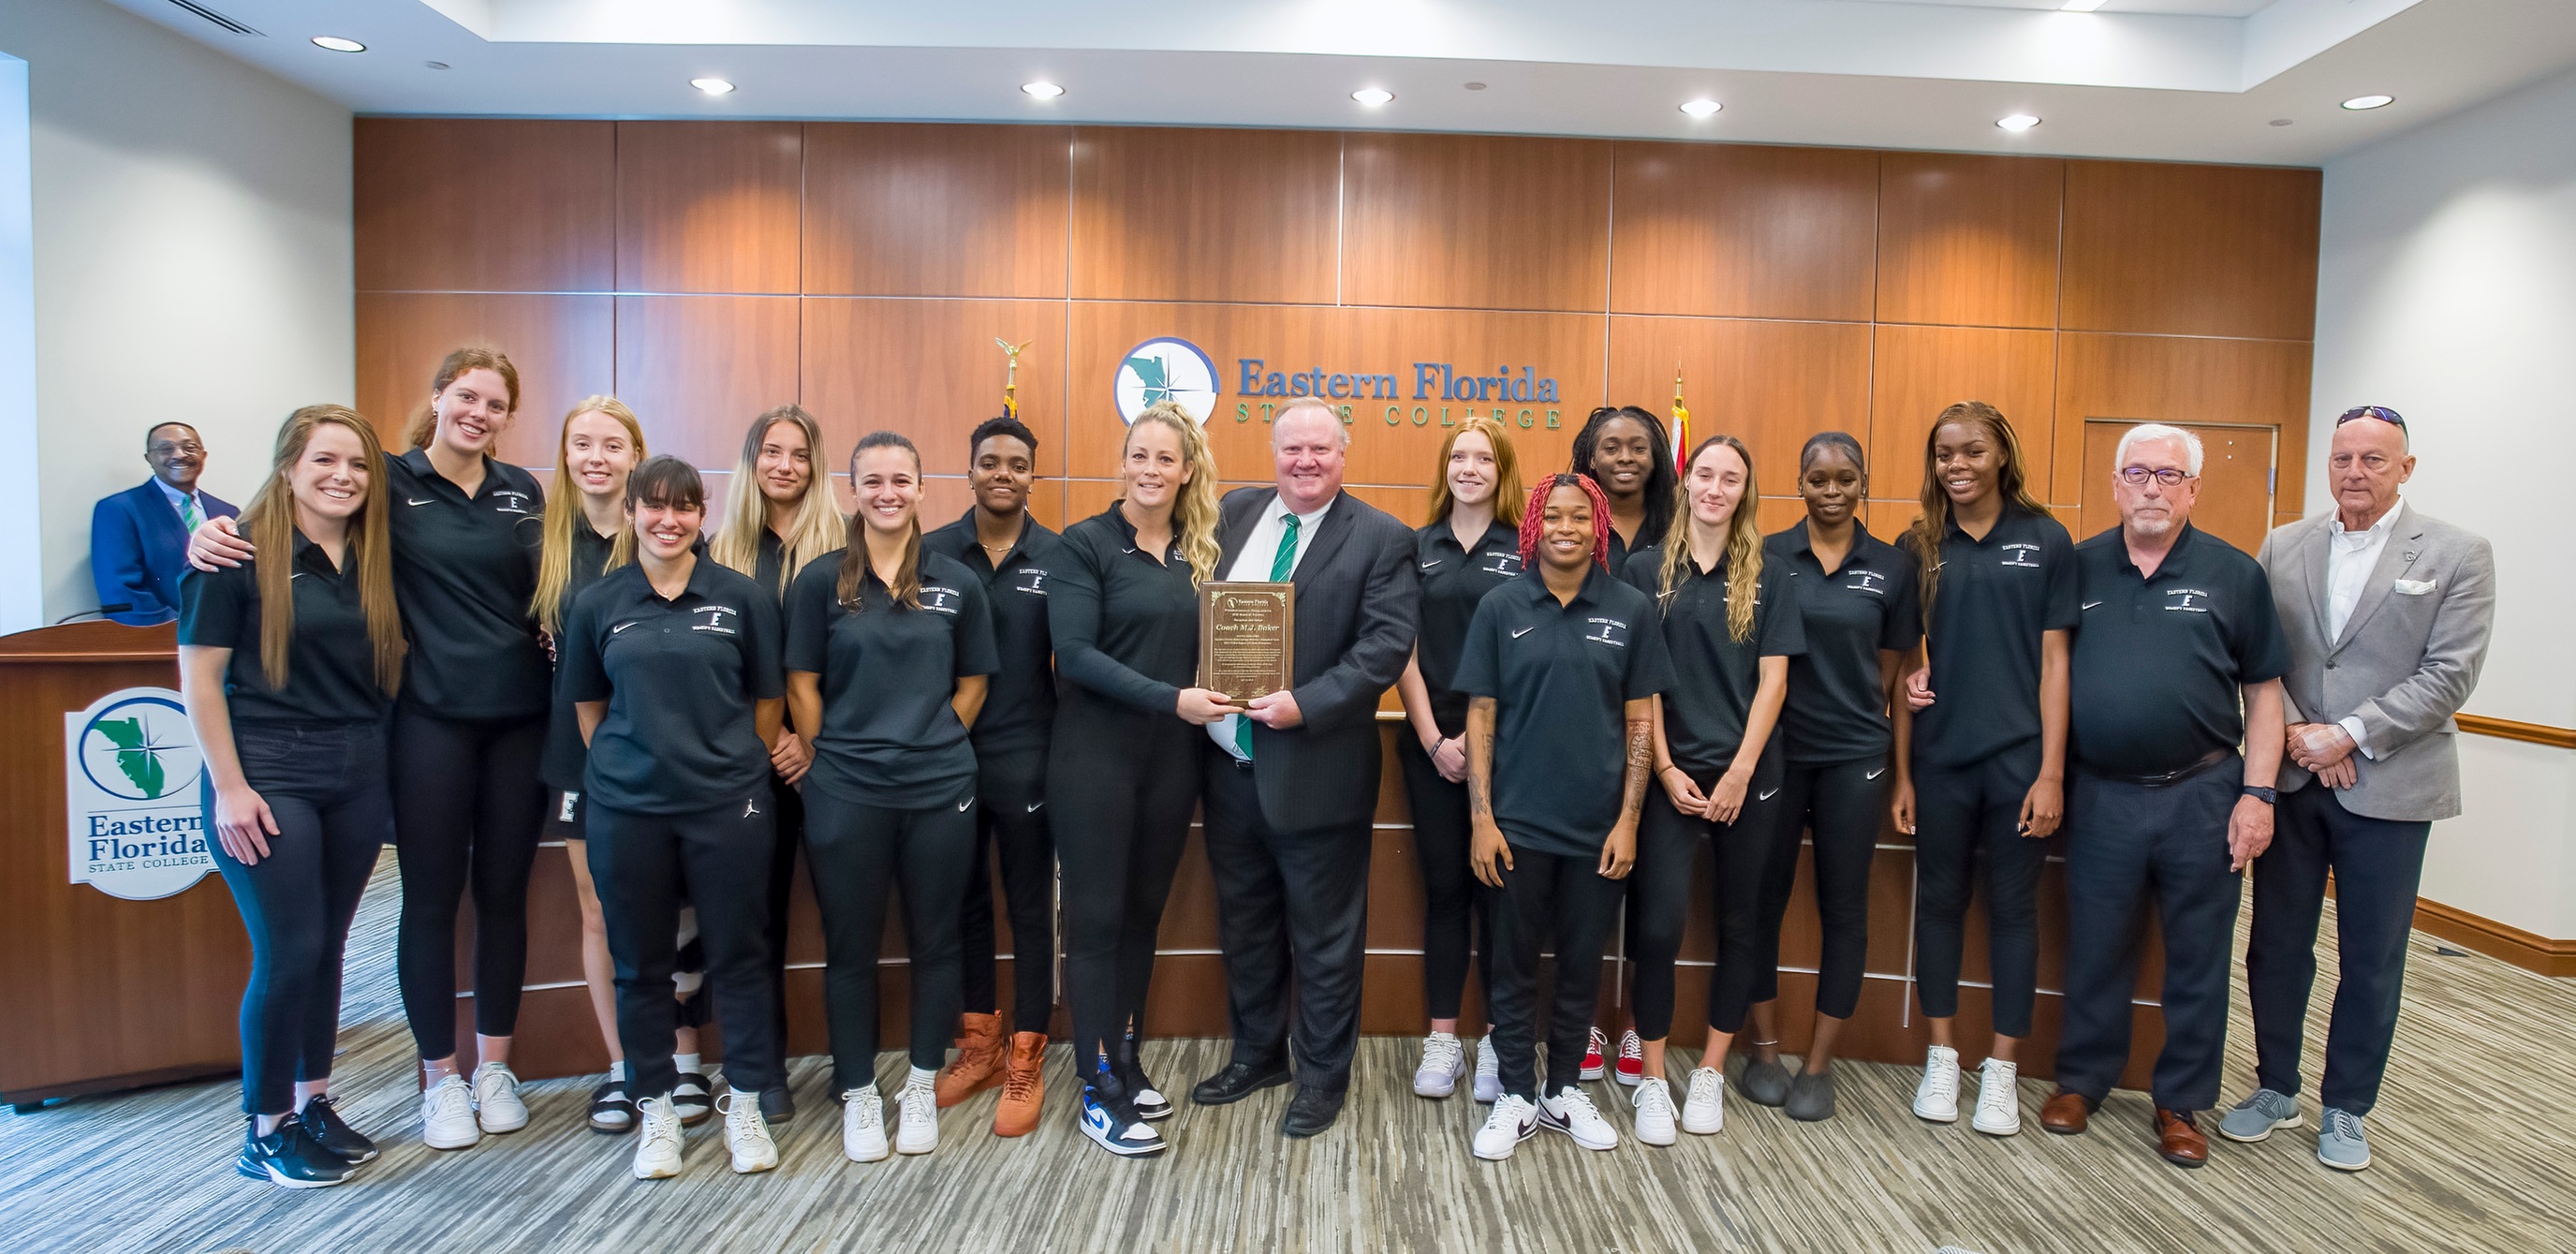 Women's basketball team recognized by Board of Trustees